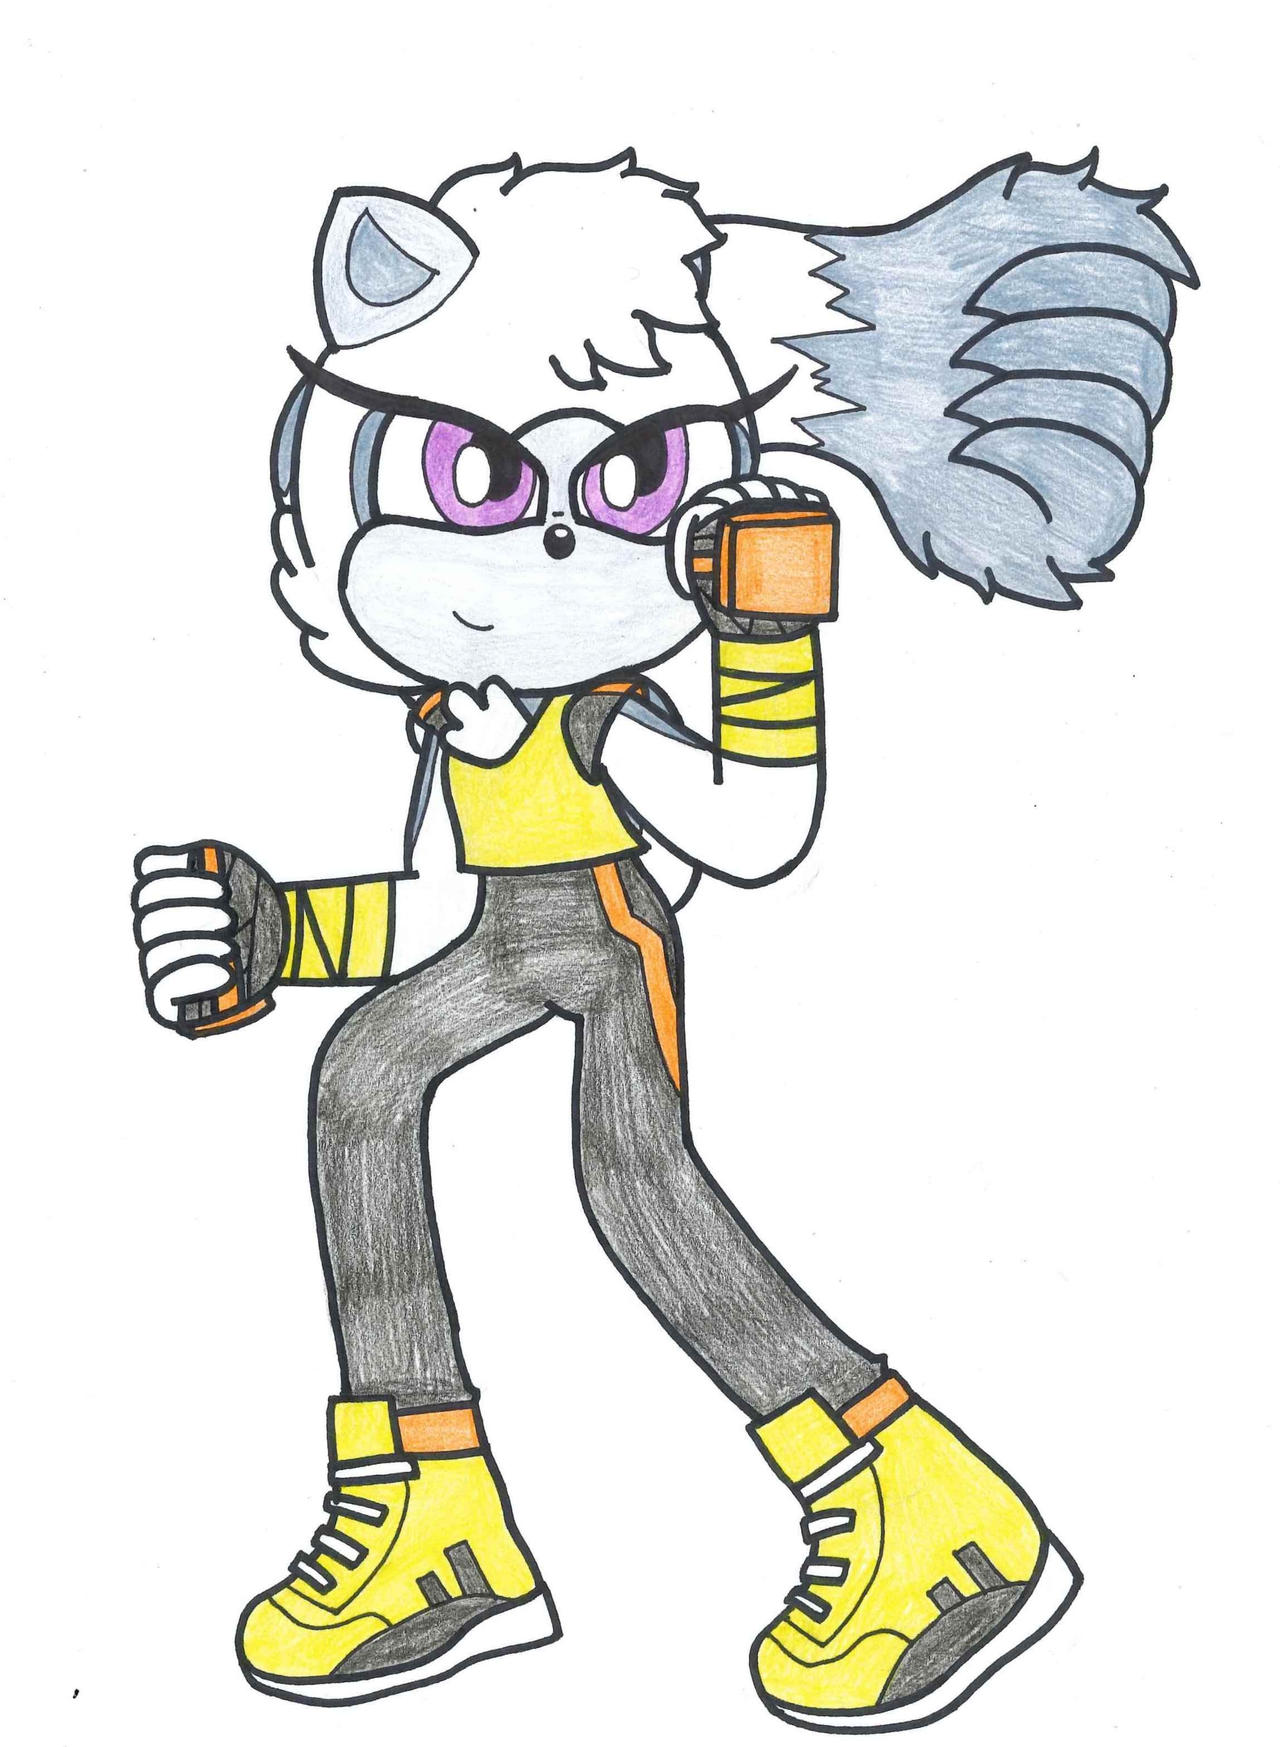 Tangle the Lemur (Sonic Channel Inspired) by WeatherUS1549 on DeviantArt